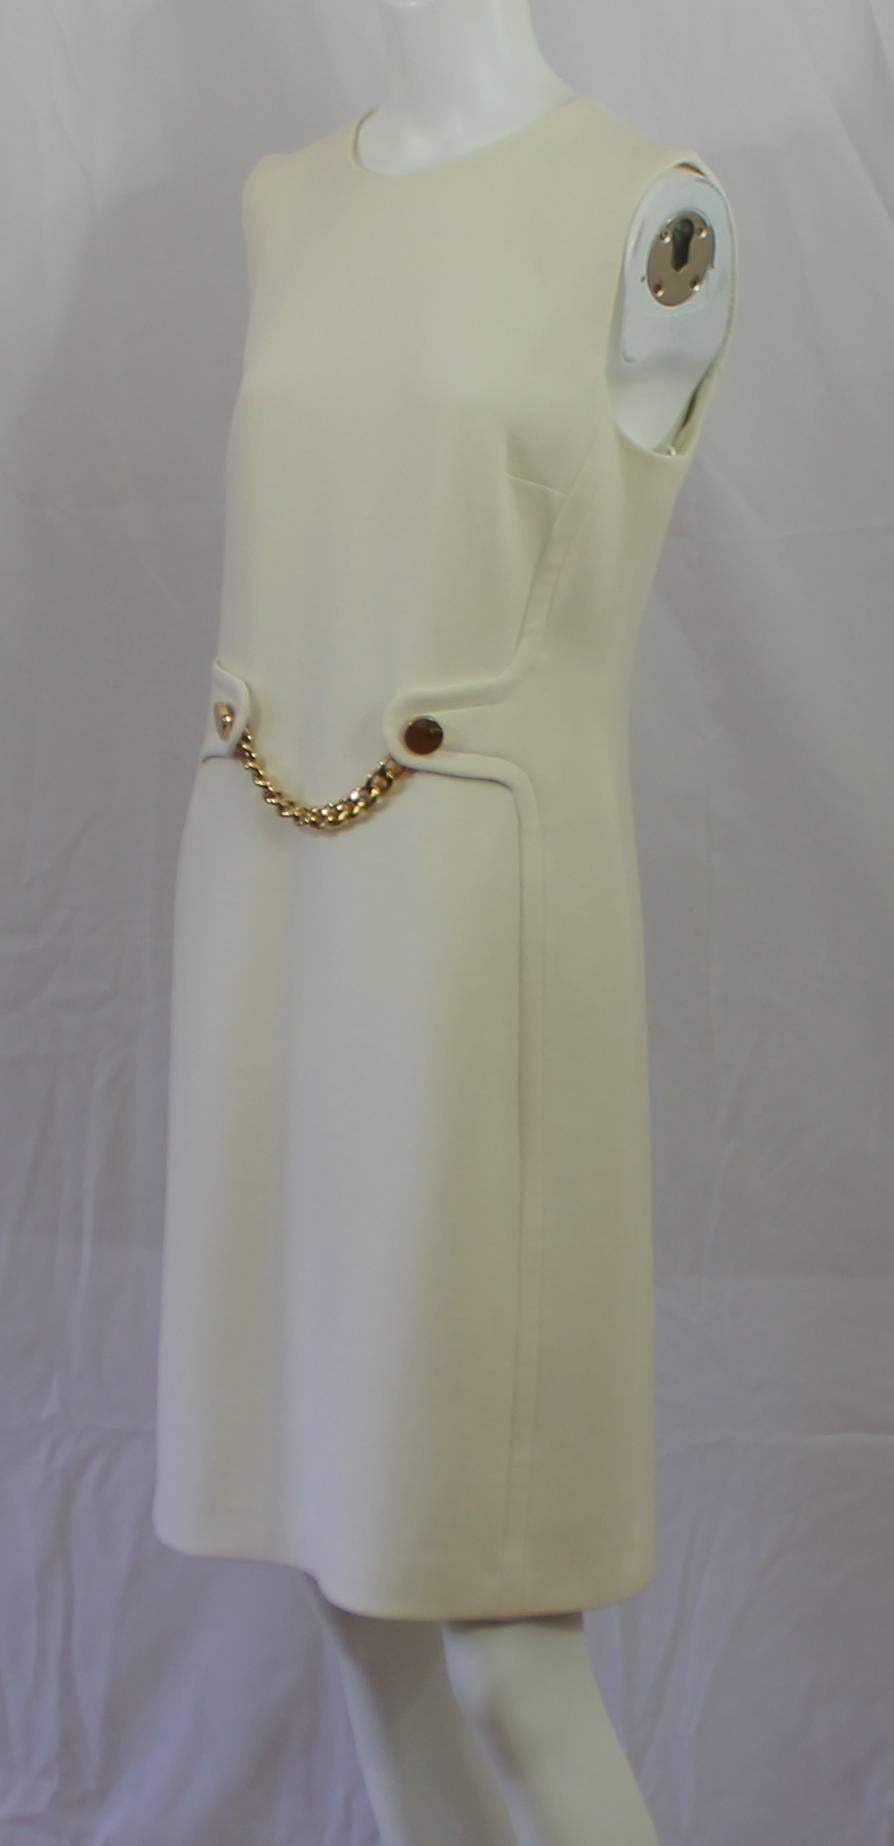 Michael Kors Ivory Lightweight Wool Sleeveless Shift Dress - GHW-10 This beautiful shift has a decorative gold chain link hanging in the front waist section, back zipper and round neckline. This dress is in excellent condition.
Measurements:
Bust